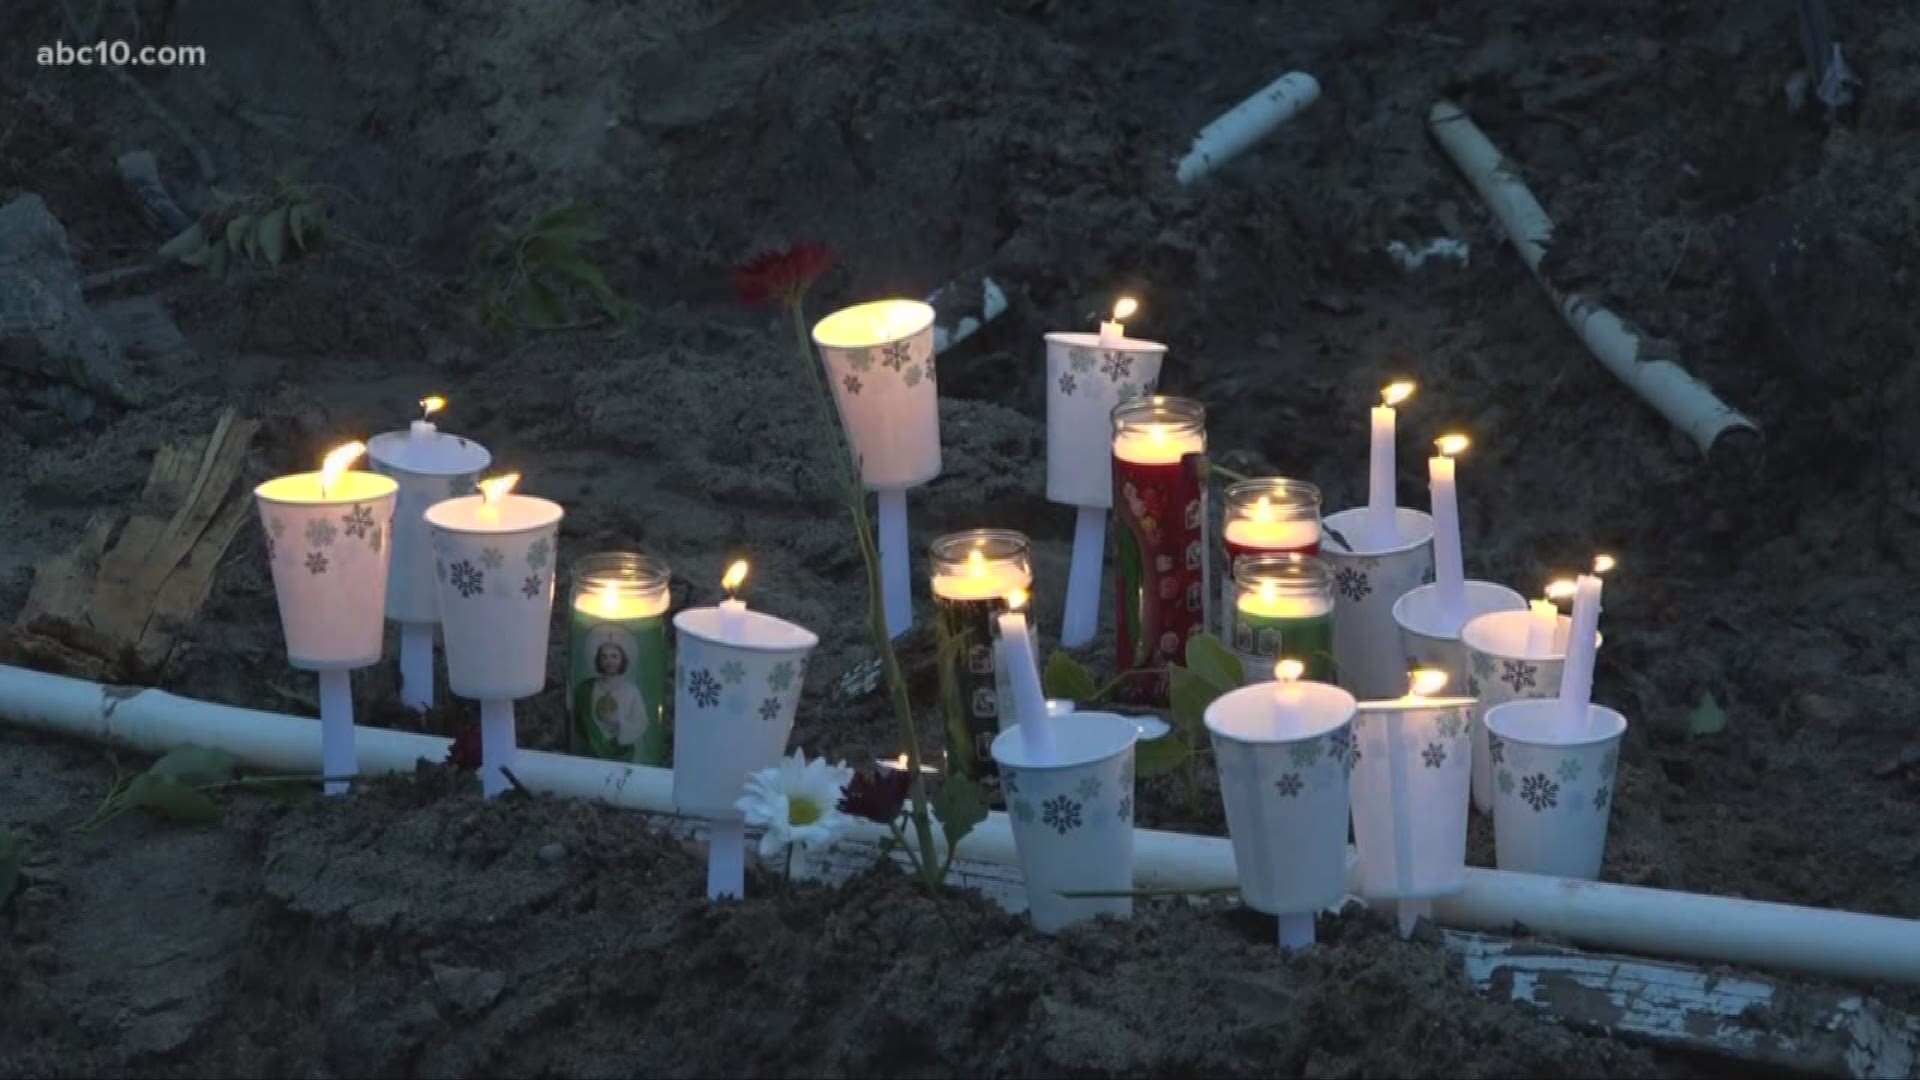 Family, friends and co-workers held a candlelight vigil for Johnny Garcia Jr. He was killed Monday while working for the City of Modesto’s public works department.